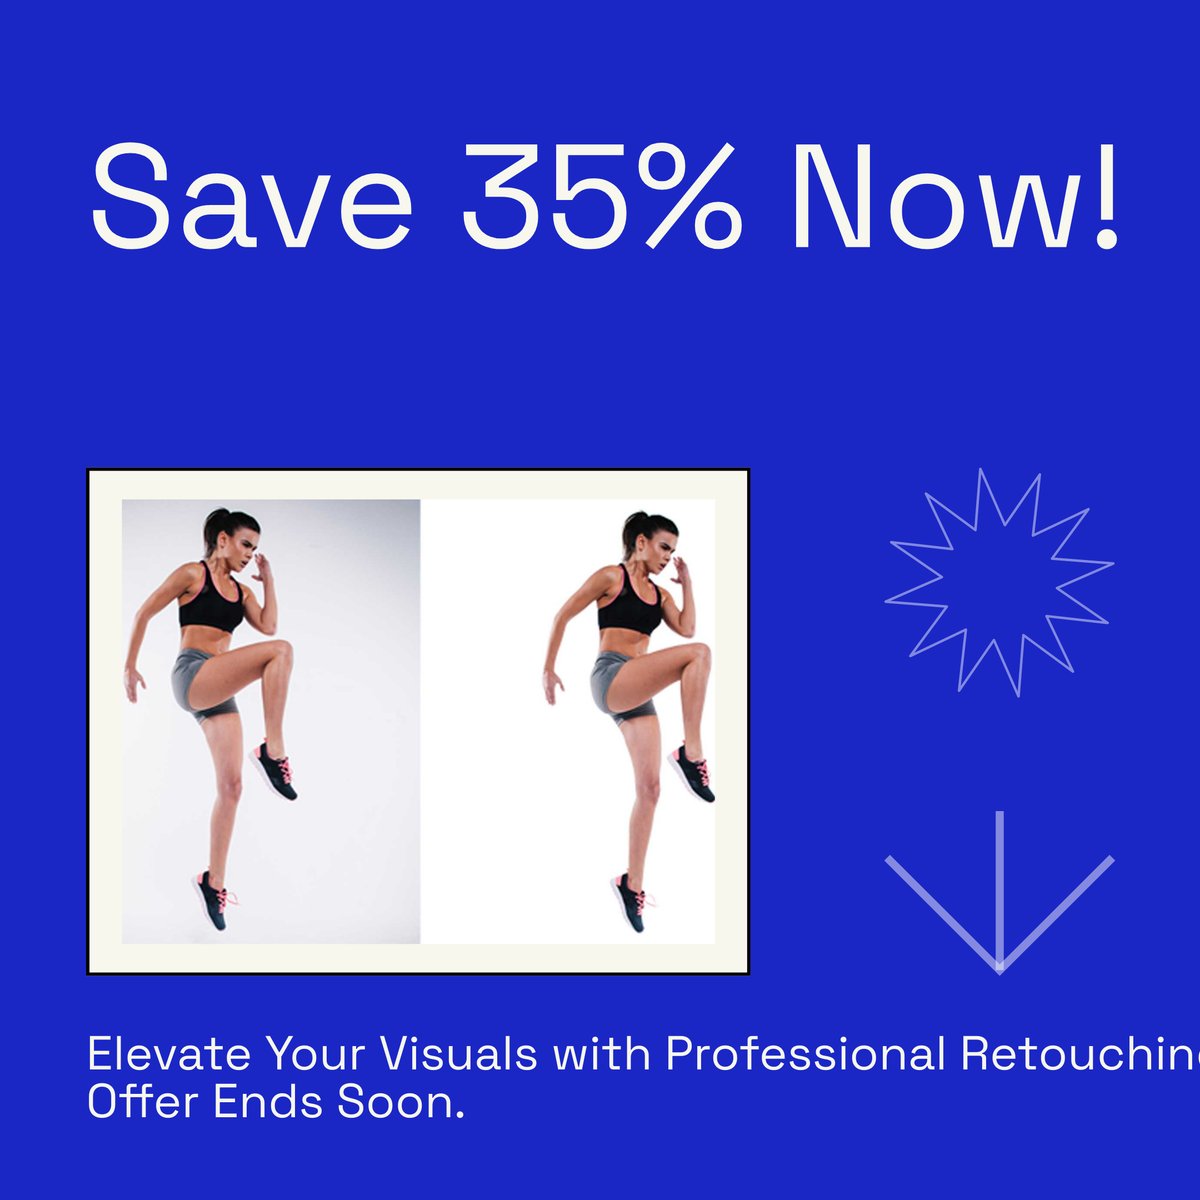 Hurry! Don't miss out on our limited time offer of 35% off on all image editing services. Elevate your visuals with our professional retouching and save big. Offer ends soon. #ImageEditing #ProfessionalRetouching #LimitedTimeOffer #HelloRetoucher